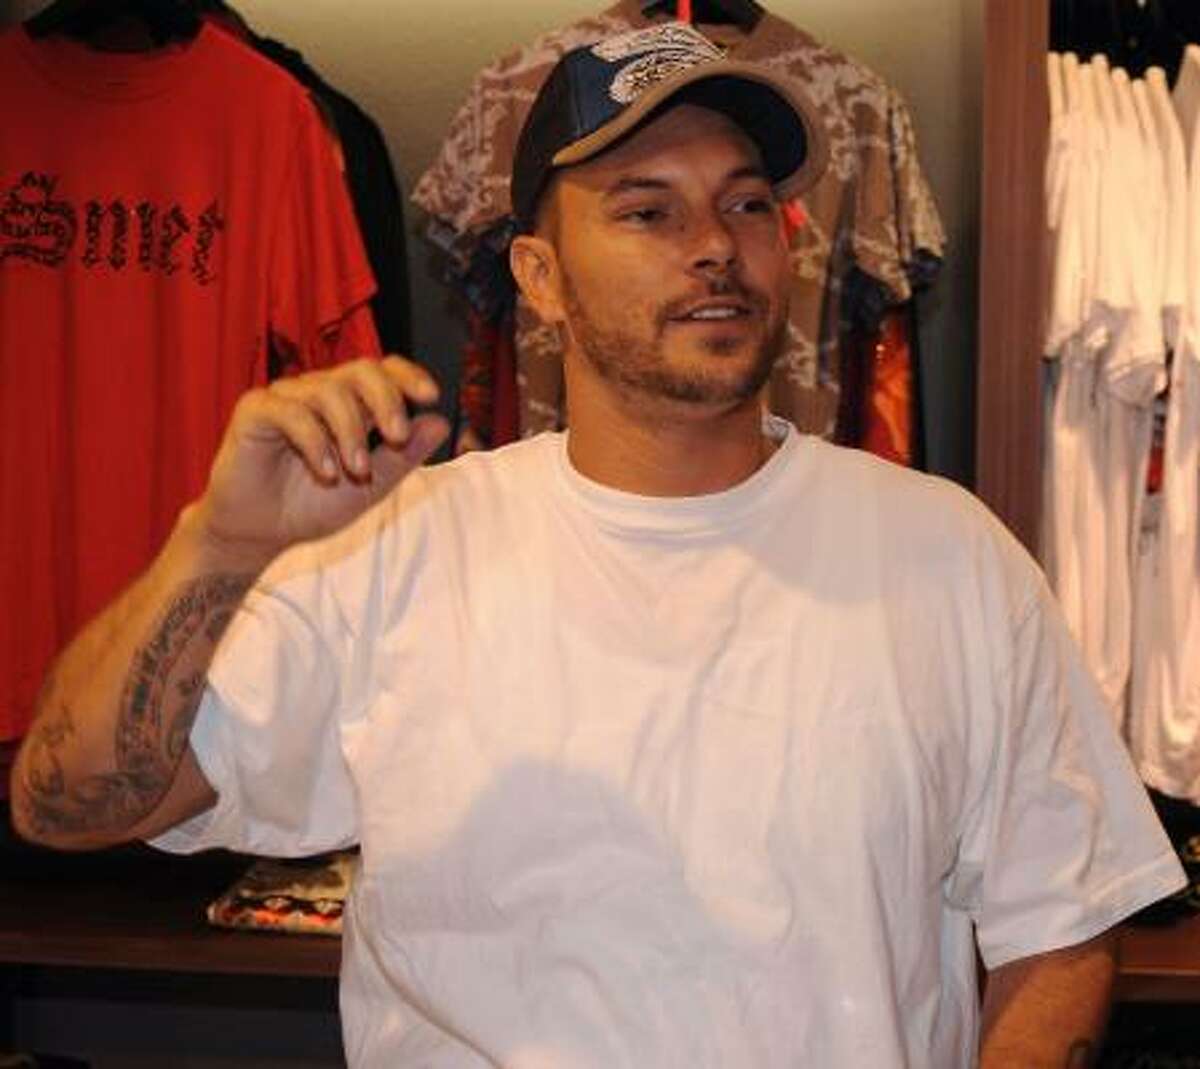 Kevin Federline, ex-husband of Britney Spears, is a divisive celebrity. Some say he's hot and others say NOT! Vote here.